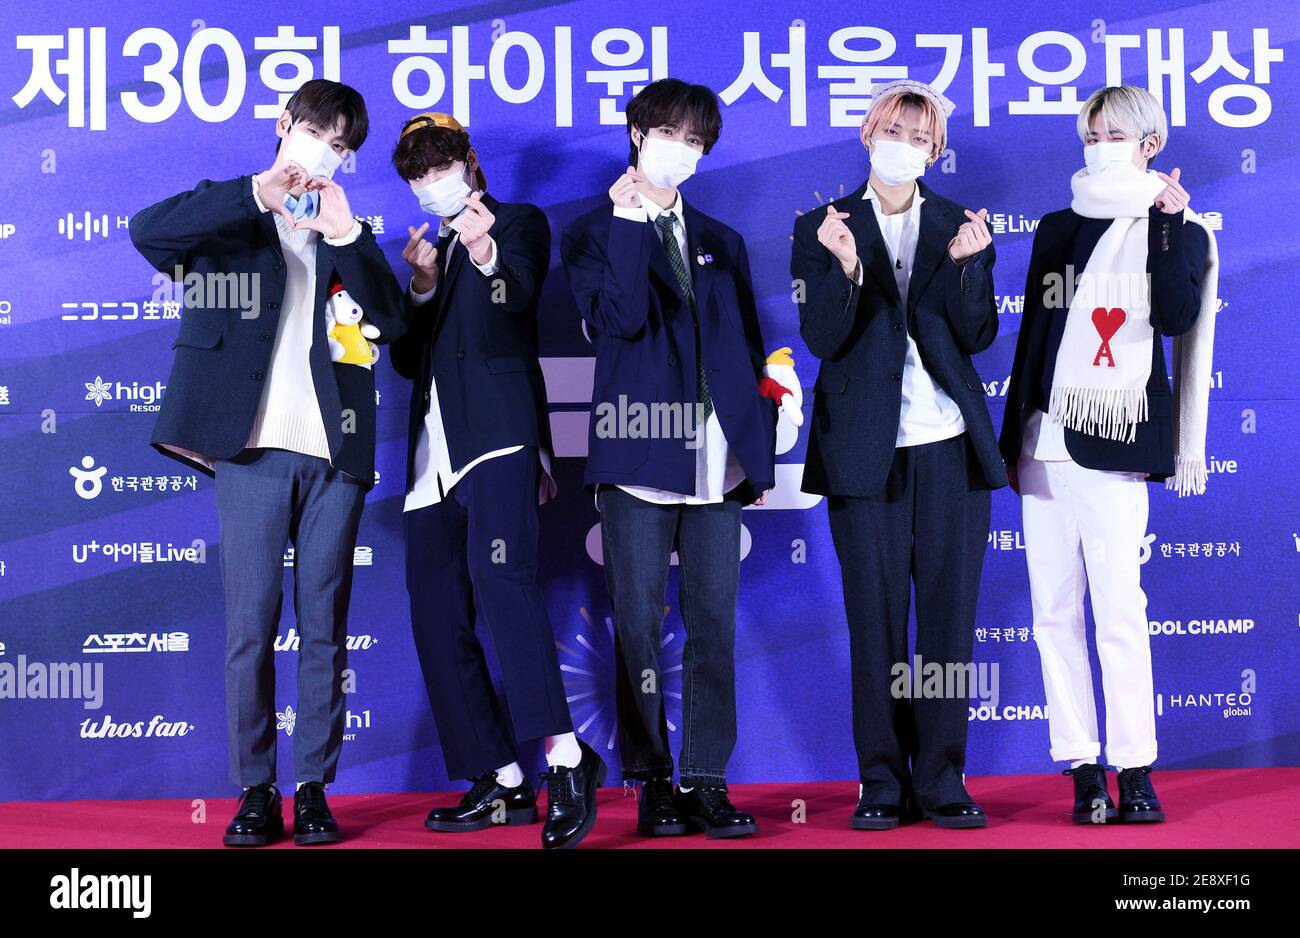 31 January 2021 - Seoul, South Korea : (In This Handout Photos released by  The Sport Seoul) South Korean K-Pop boy band TXT (Tomorrow by Together),  attend a photo call for the